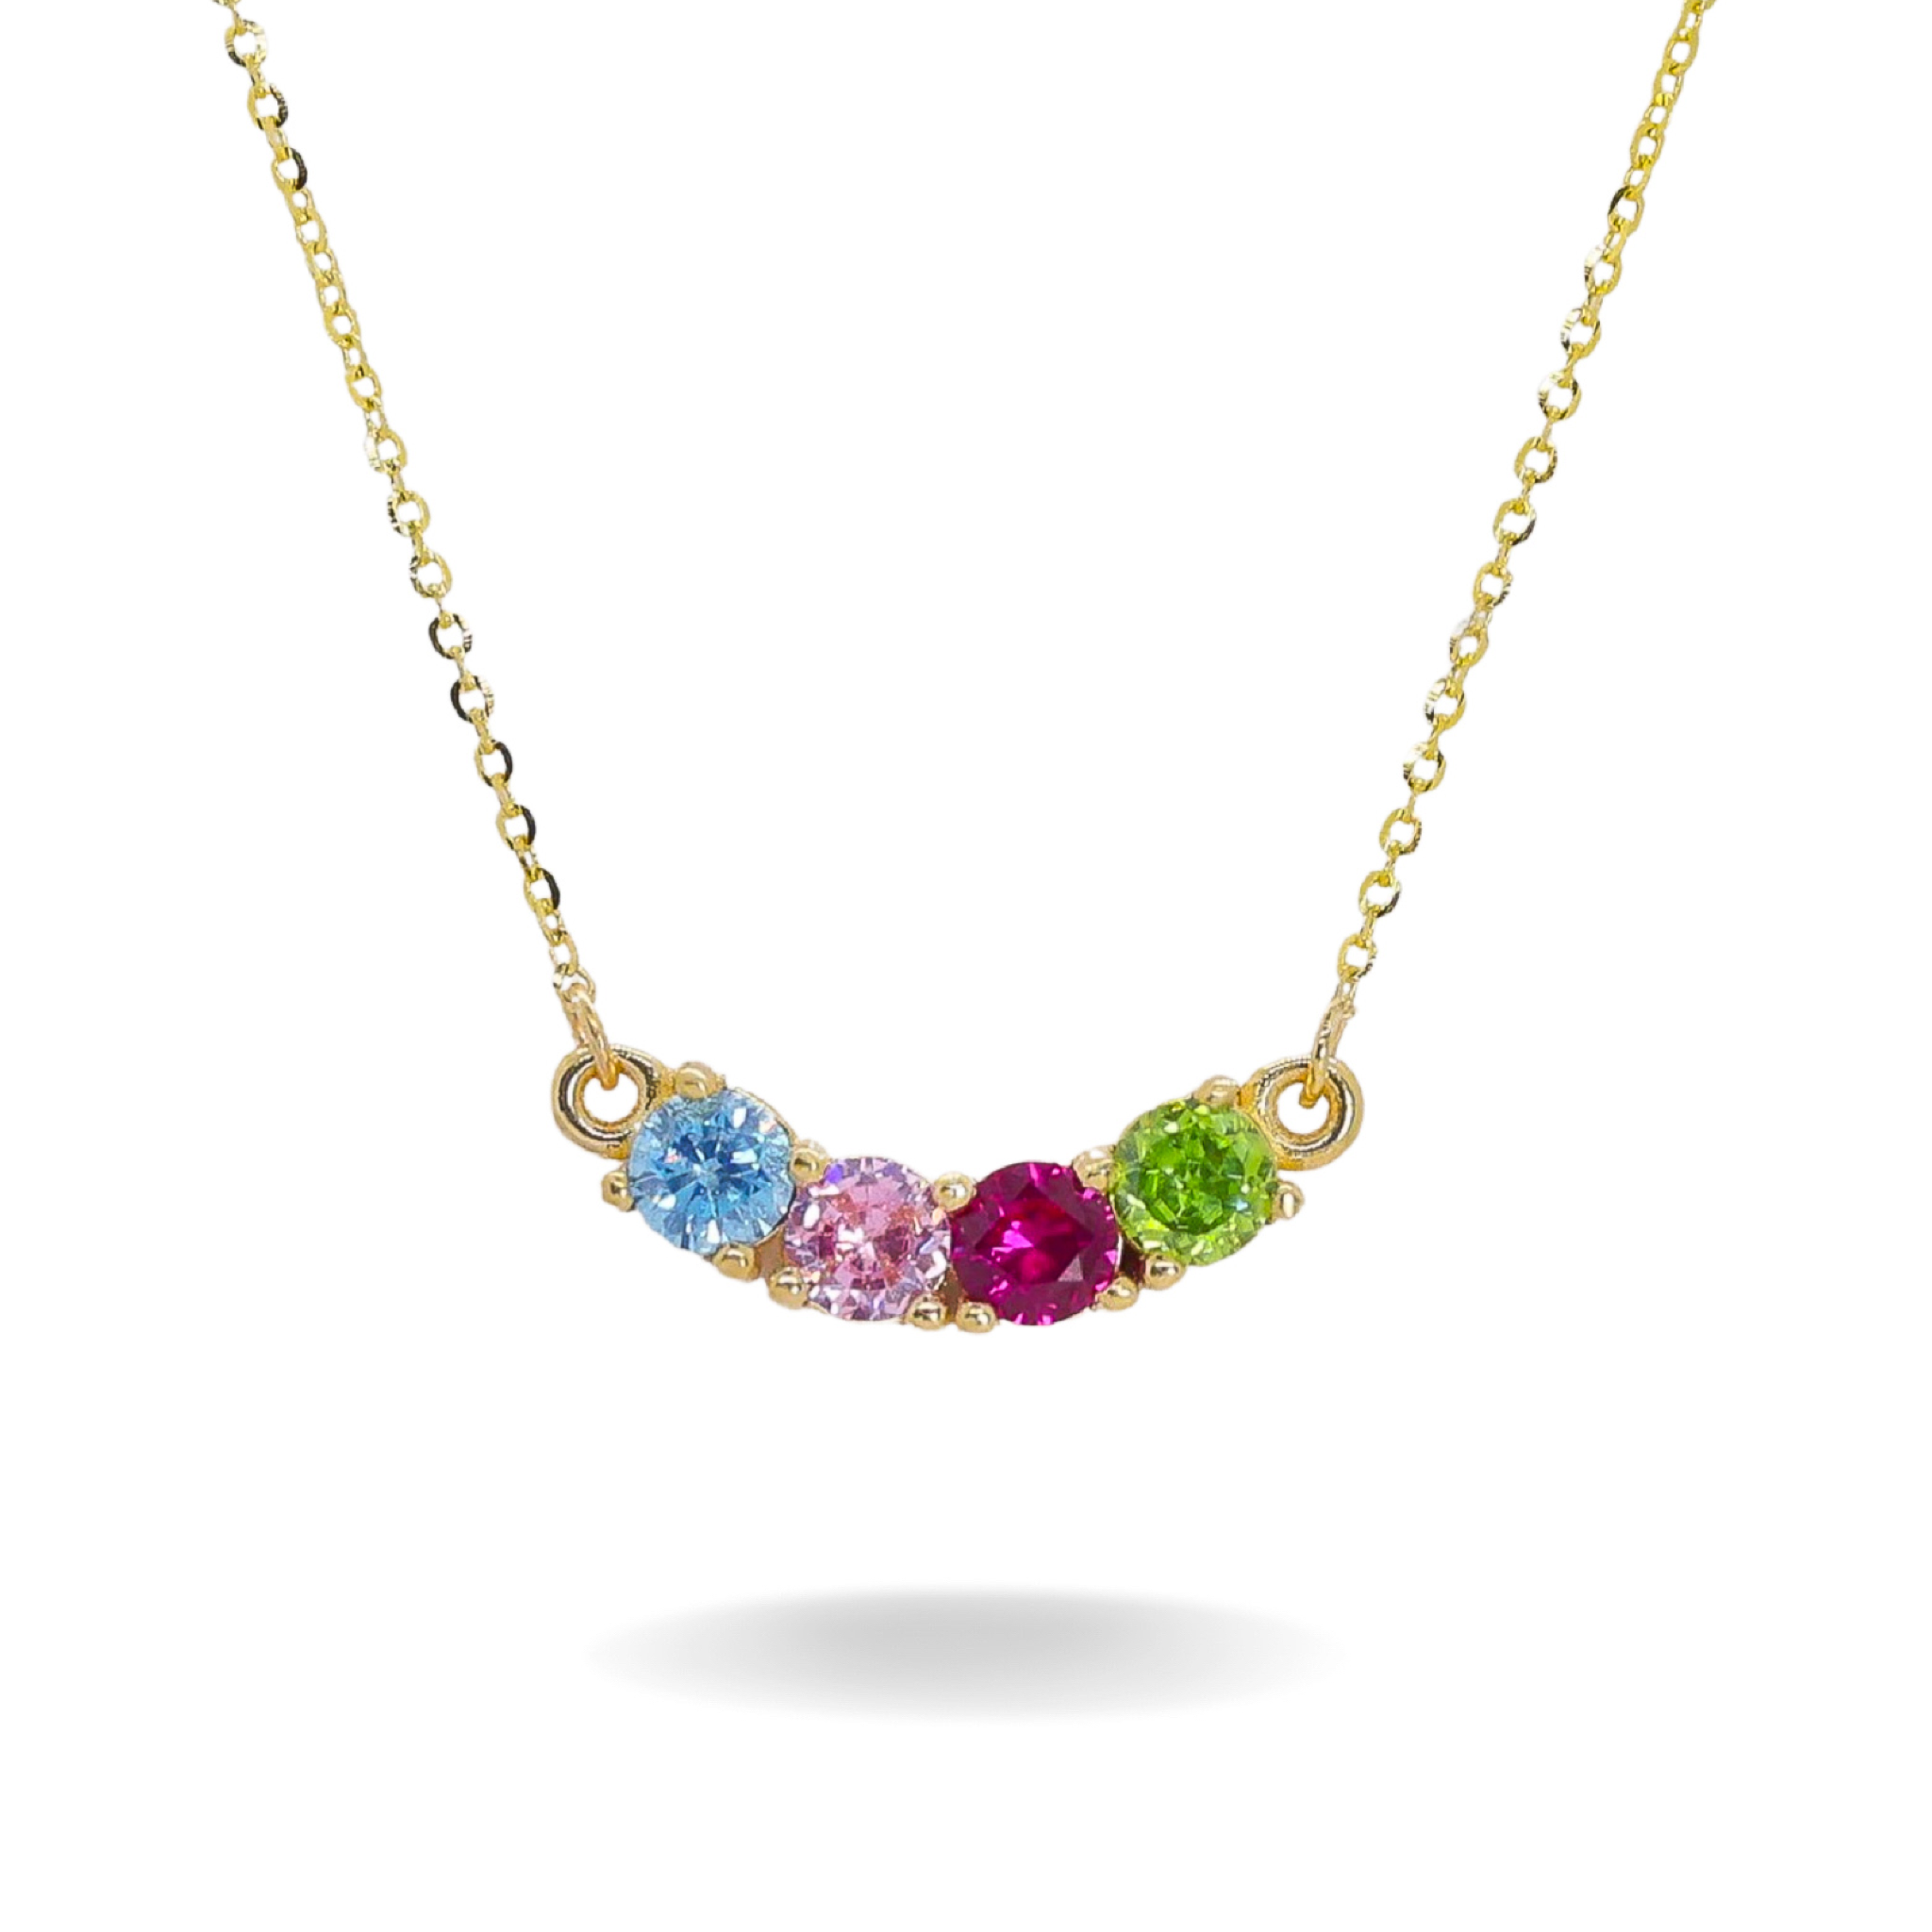 14K YELLOW GOLD PERSONALIZED BIRTHSTONE NECKLACE